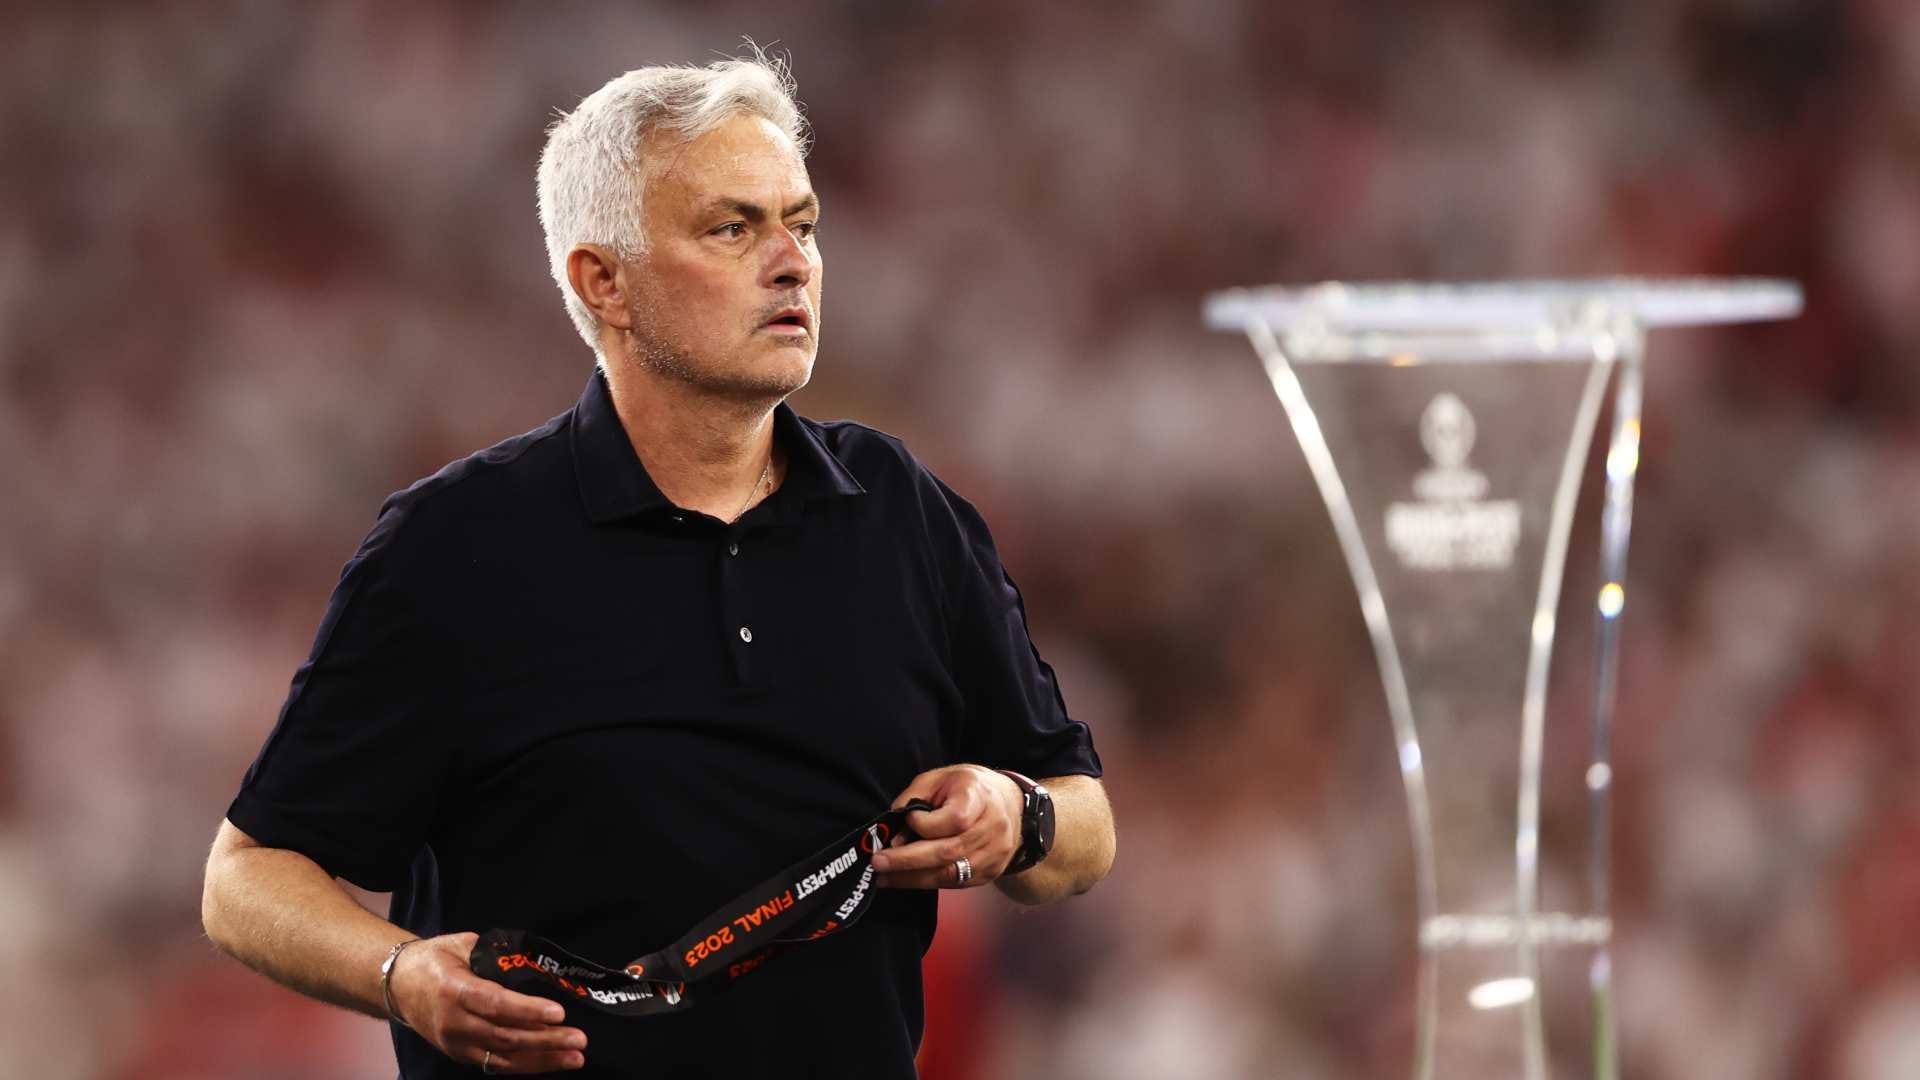 Furious Jose Mourinho insists Roma side 'deserved' to lose 2-0 to Slavia  Prague as he claims 'nothing worked' in Europa League clash and singles out  players who 'had the wrong attitude